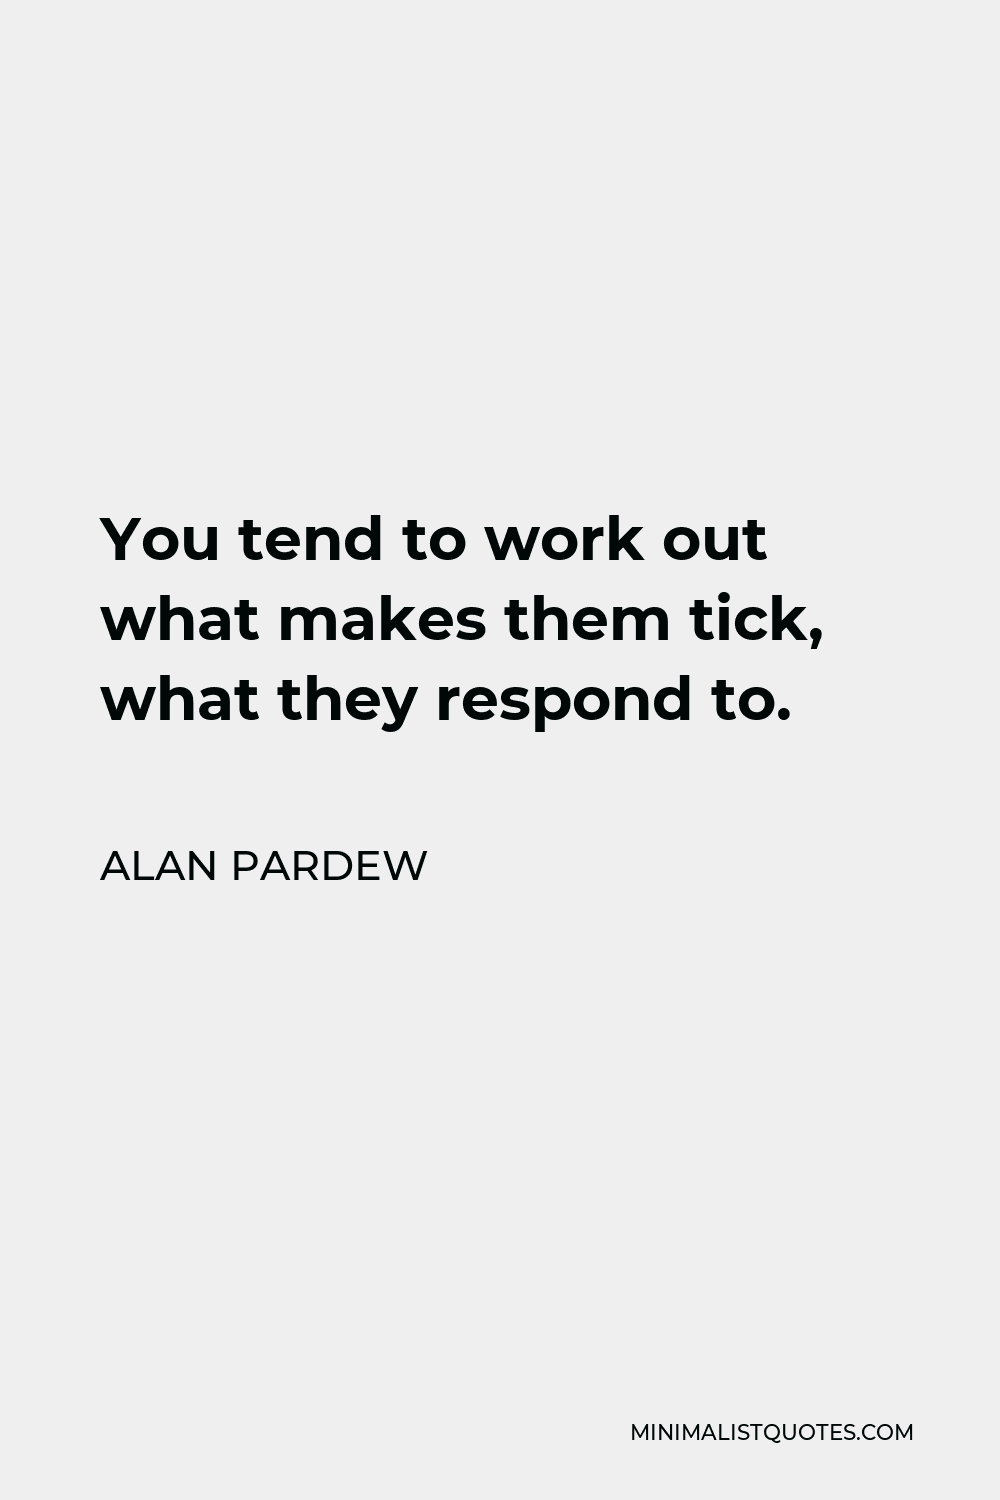 Alan Pardew Quote - You tend to work out what makes them tick, what they respond to.